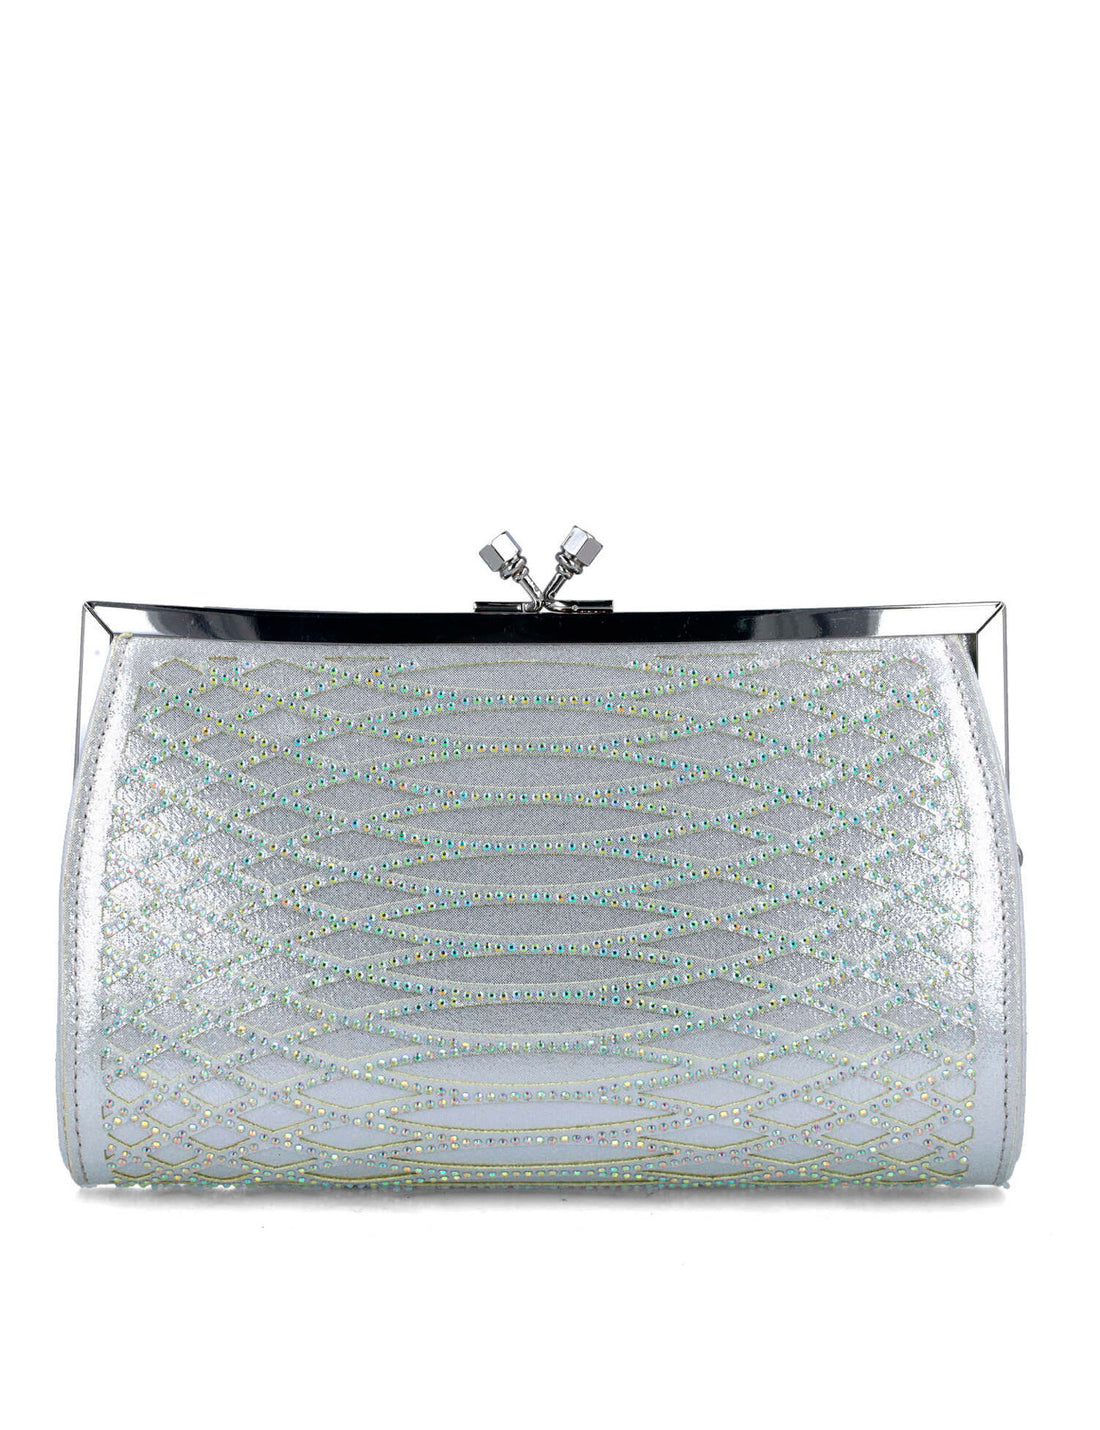 Silver Clutch In Imitation Snake Leather_85597_09_01